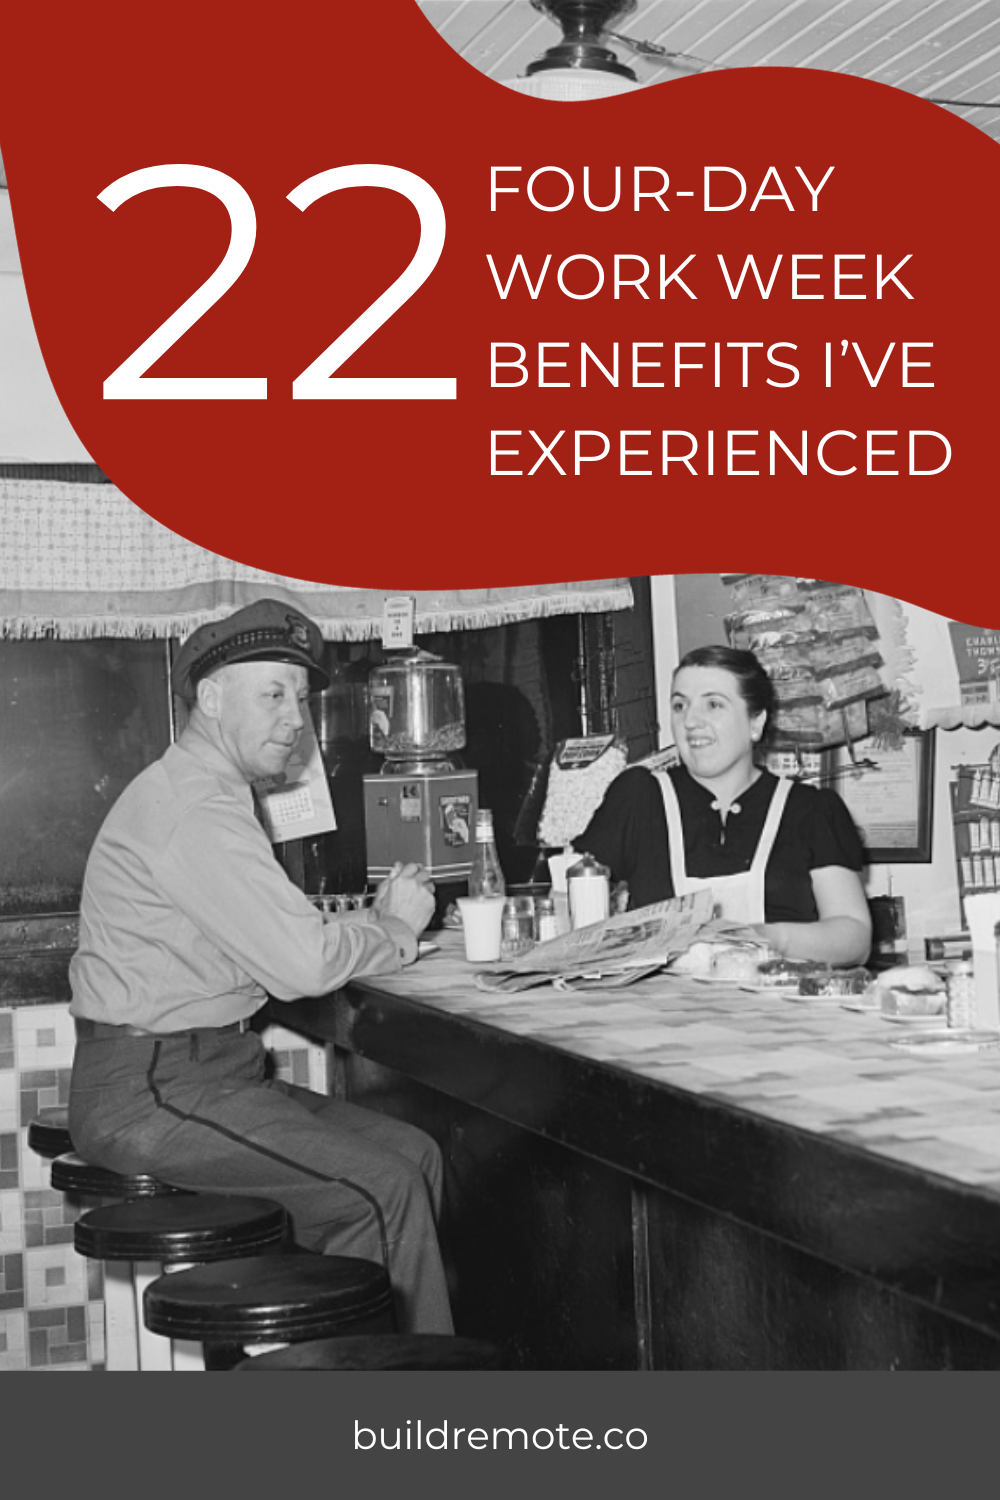 Pinterest Image - 22 Four-Day Work Week Benefits I’ve Experienced